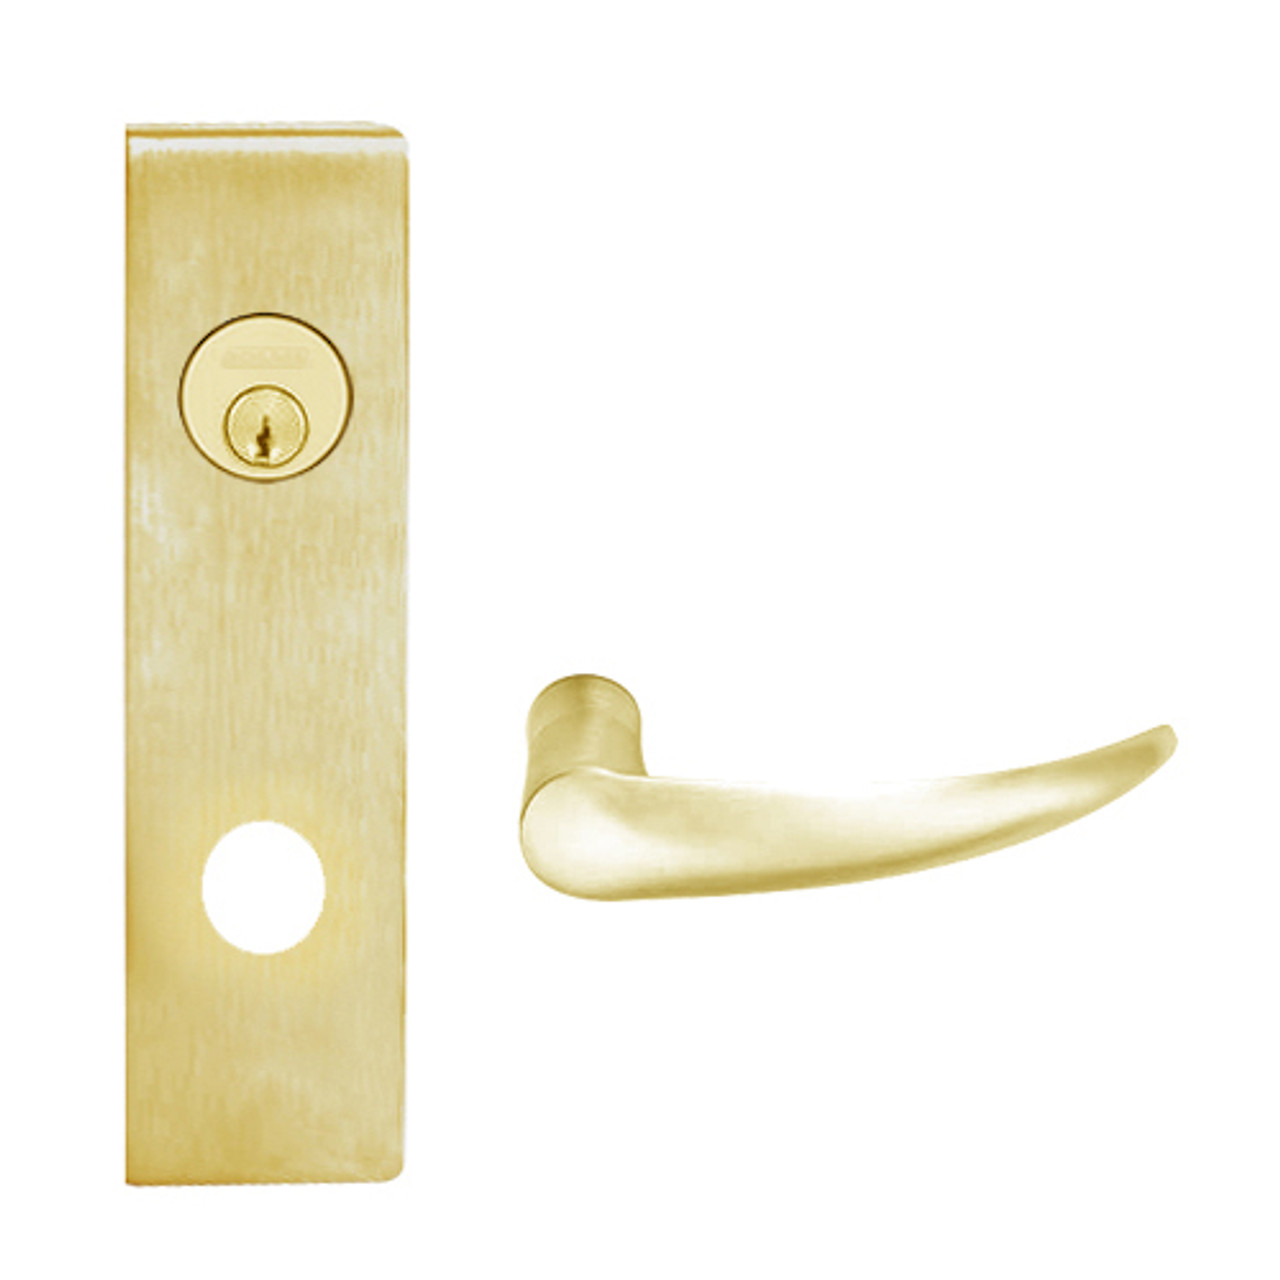 L9453L-OME-N-606 Schlage L Series Less Cylinder Entrance with Deadbolt Commercial Mortise Lock with Omega Lever Design in Satin Brass